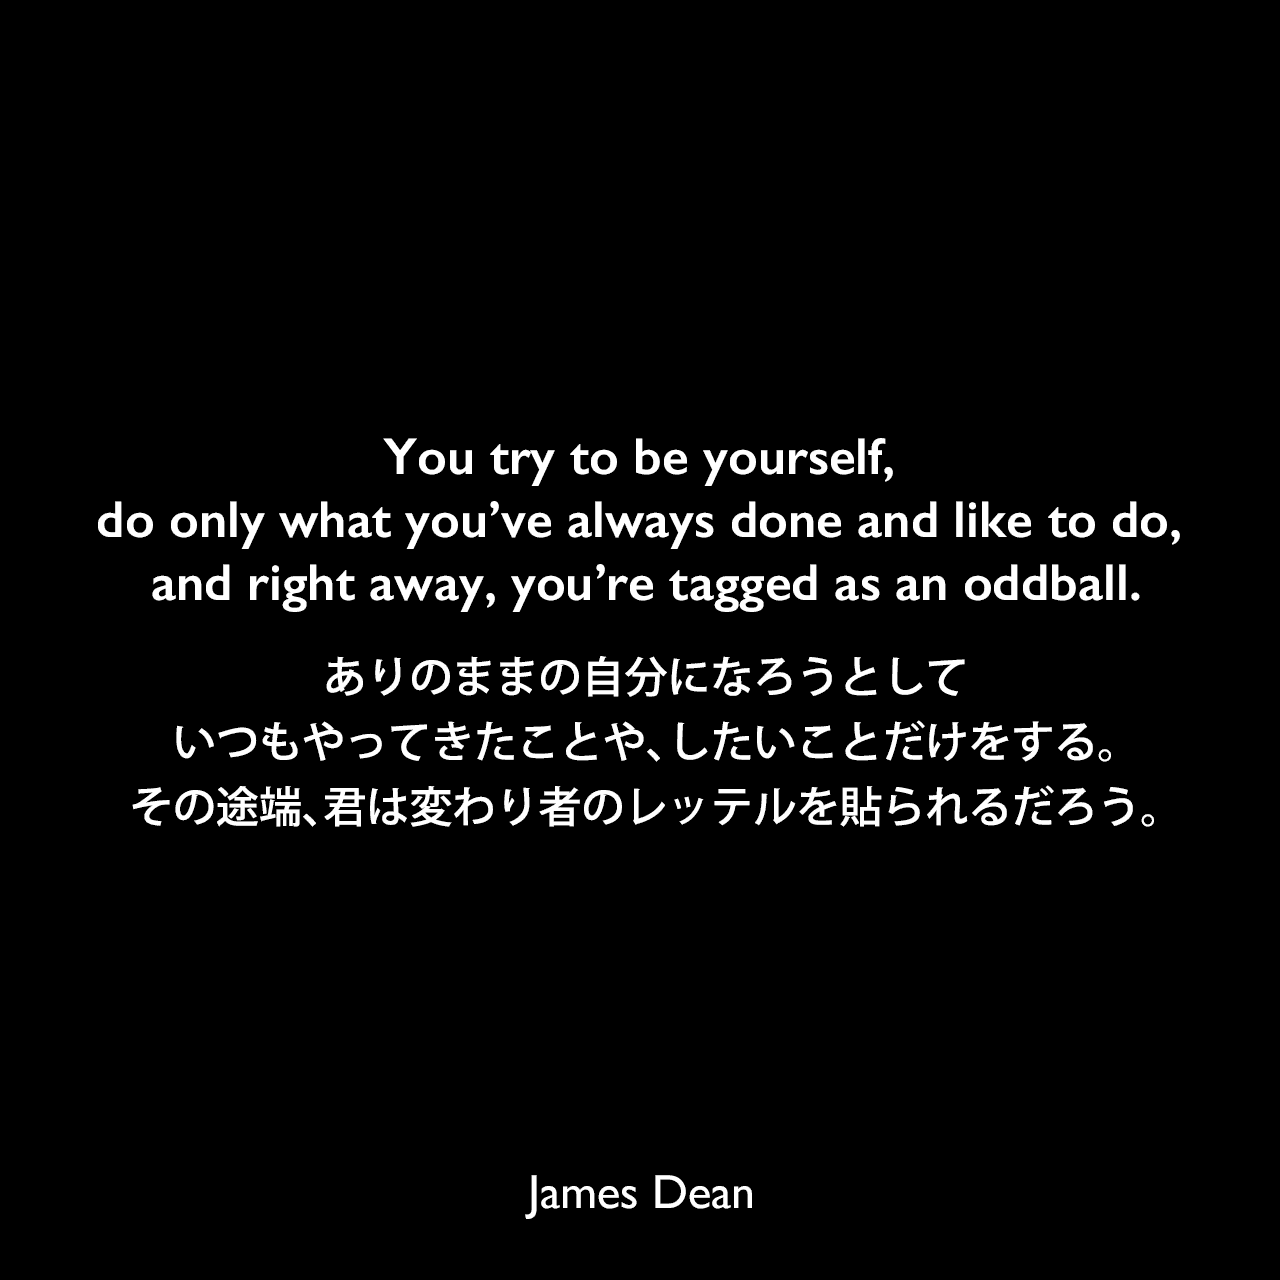 You try to be yourself, do only what you’ve always done and like to do, and right away, you’re tagged as an oddball.ありのままの自分になろうとして、いつもやってきたことや、したいことだけをする。その途端、君は変わり者のレッテルを貼られるだろう。James Dean